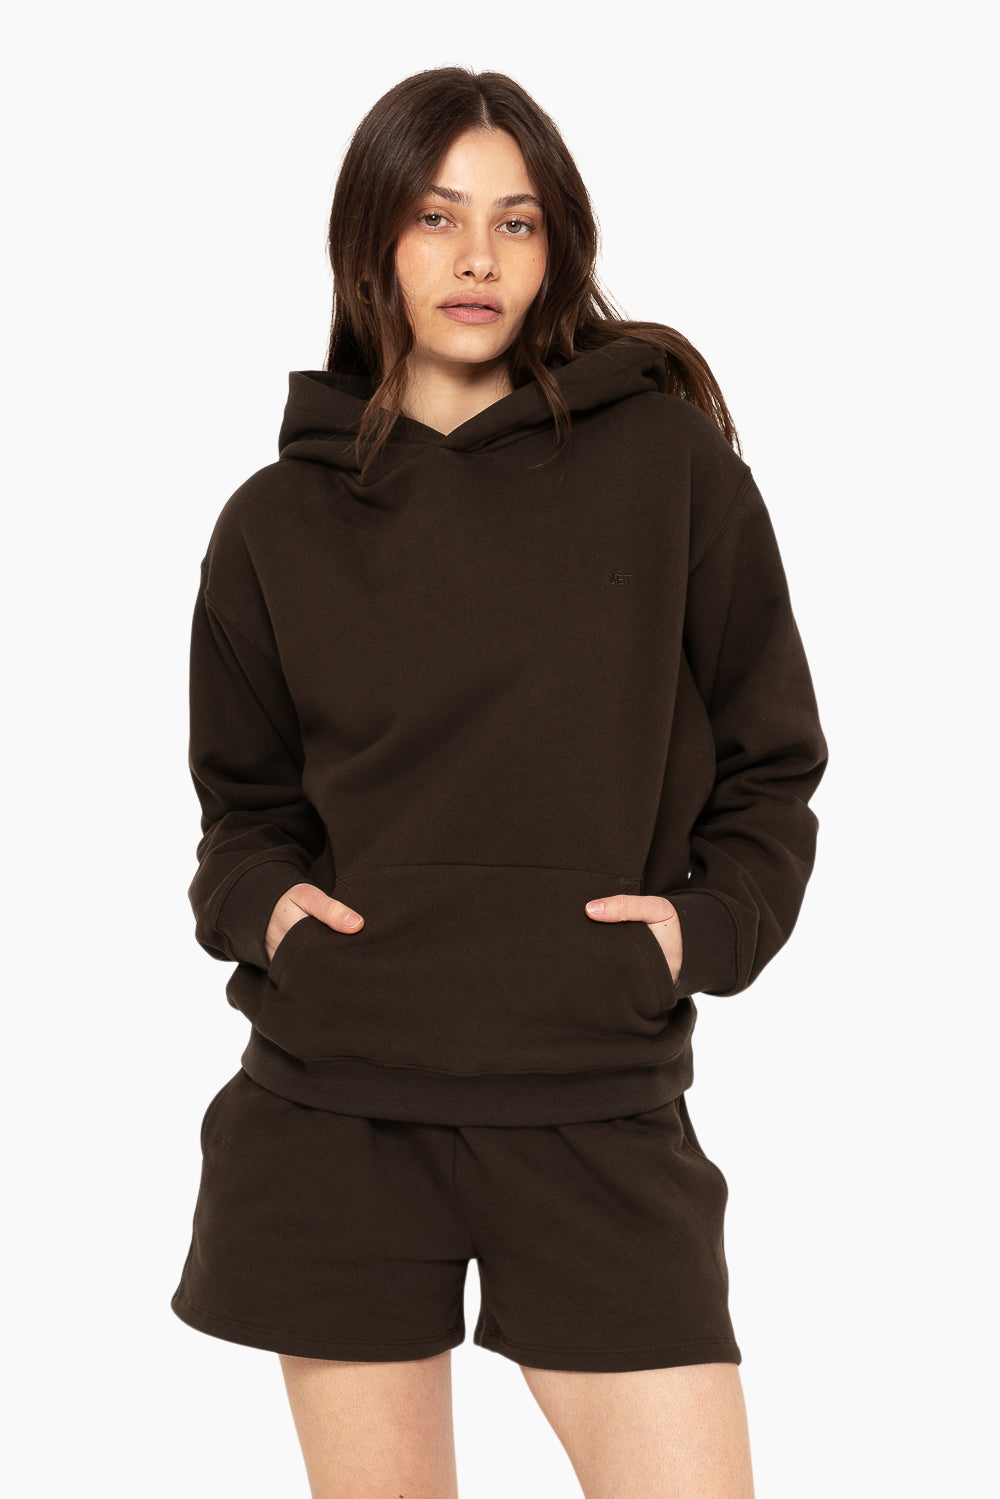 SET™ EMBROIDERED HEAVYWEIGHT SWEATS HOODIE IN ESPRESSO